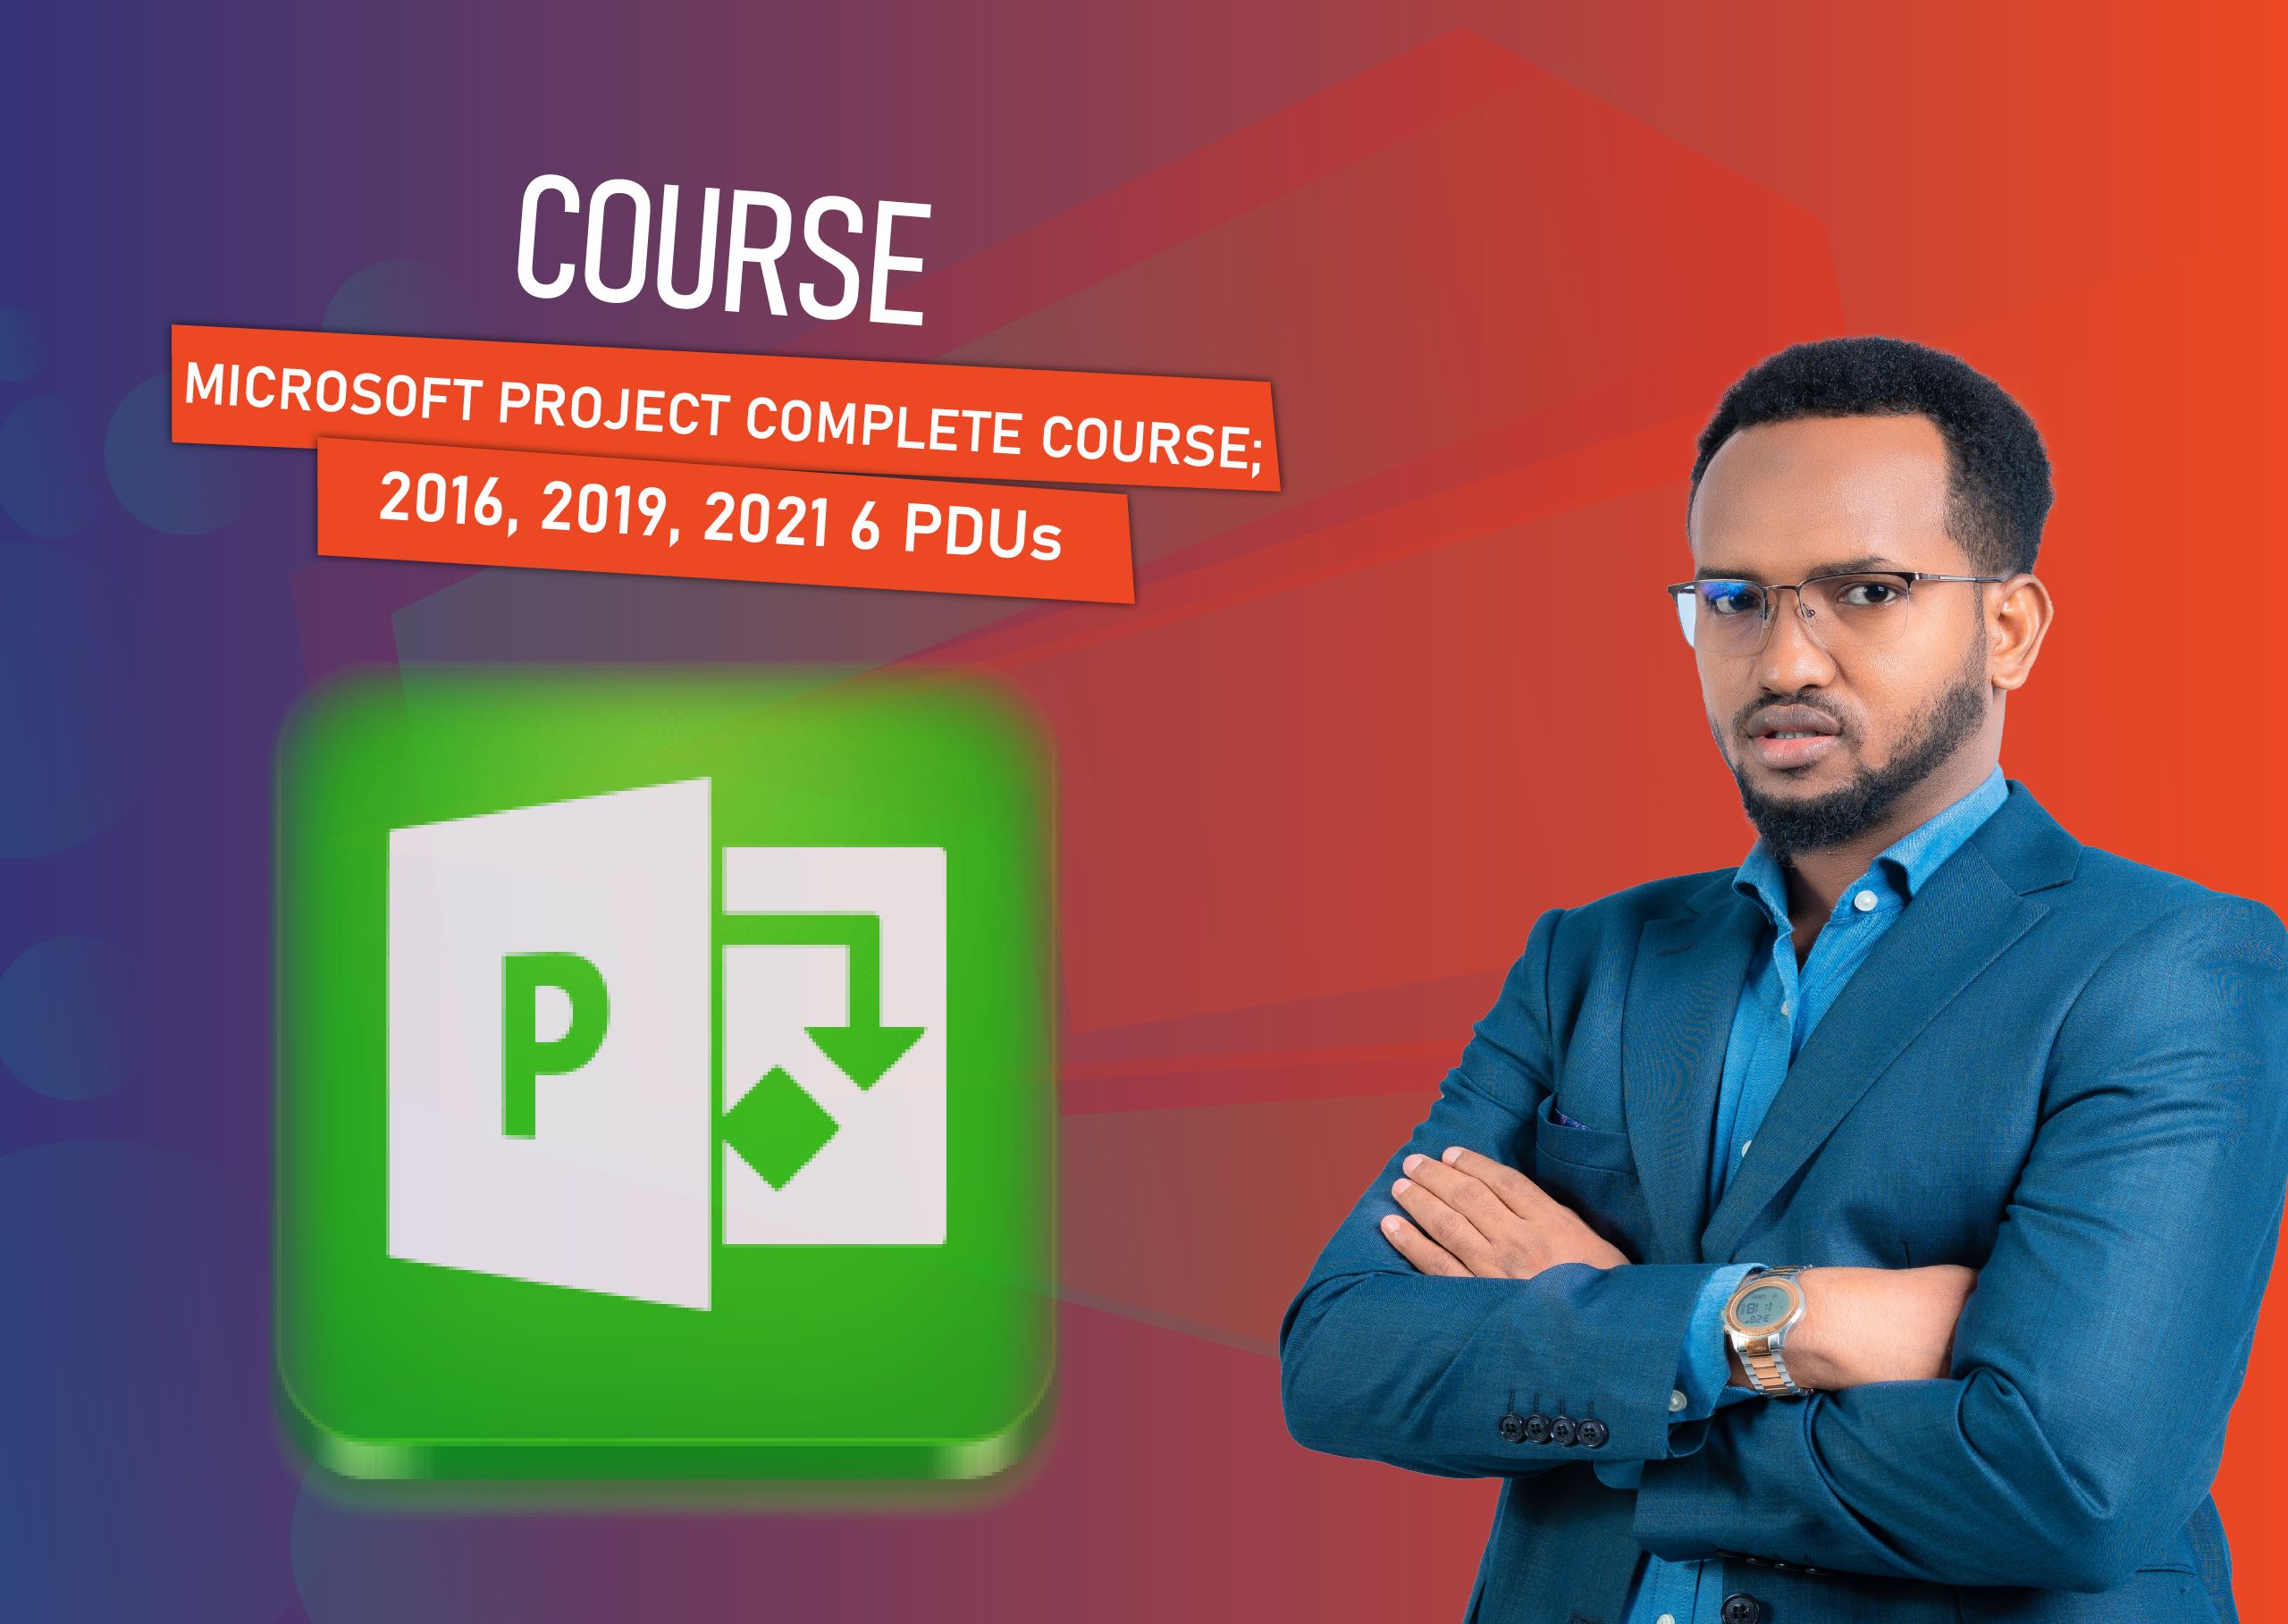 Microsoft Project Complete Course , 2016, 2019, 2021 9 PDUs